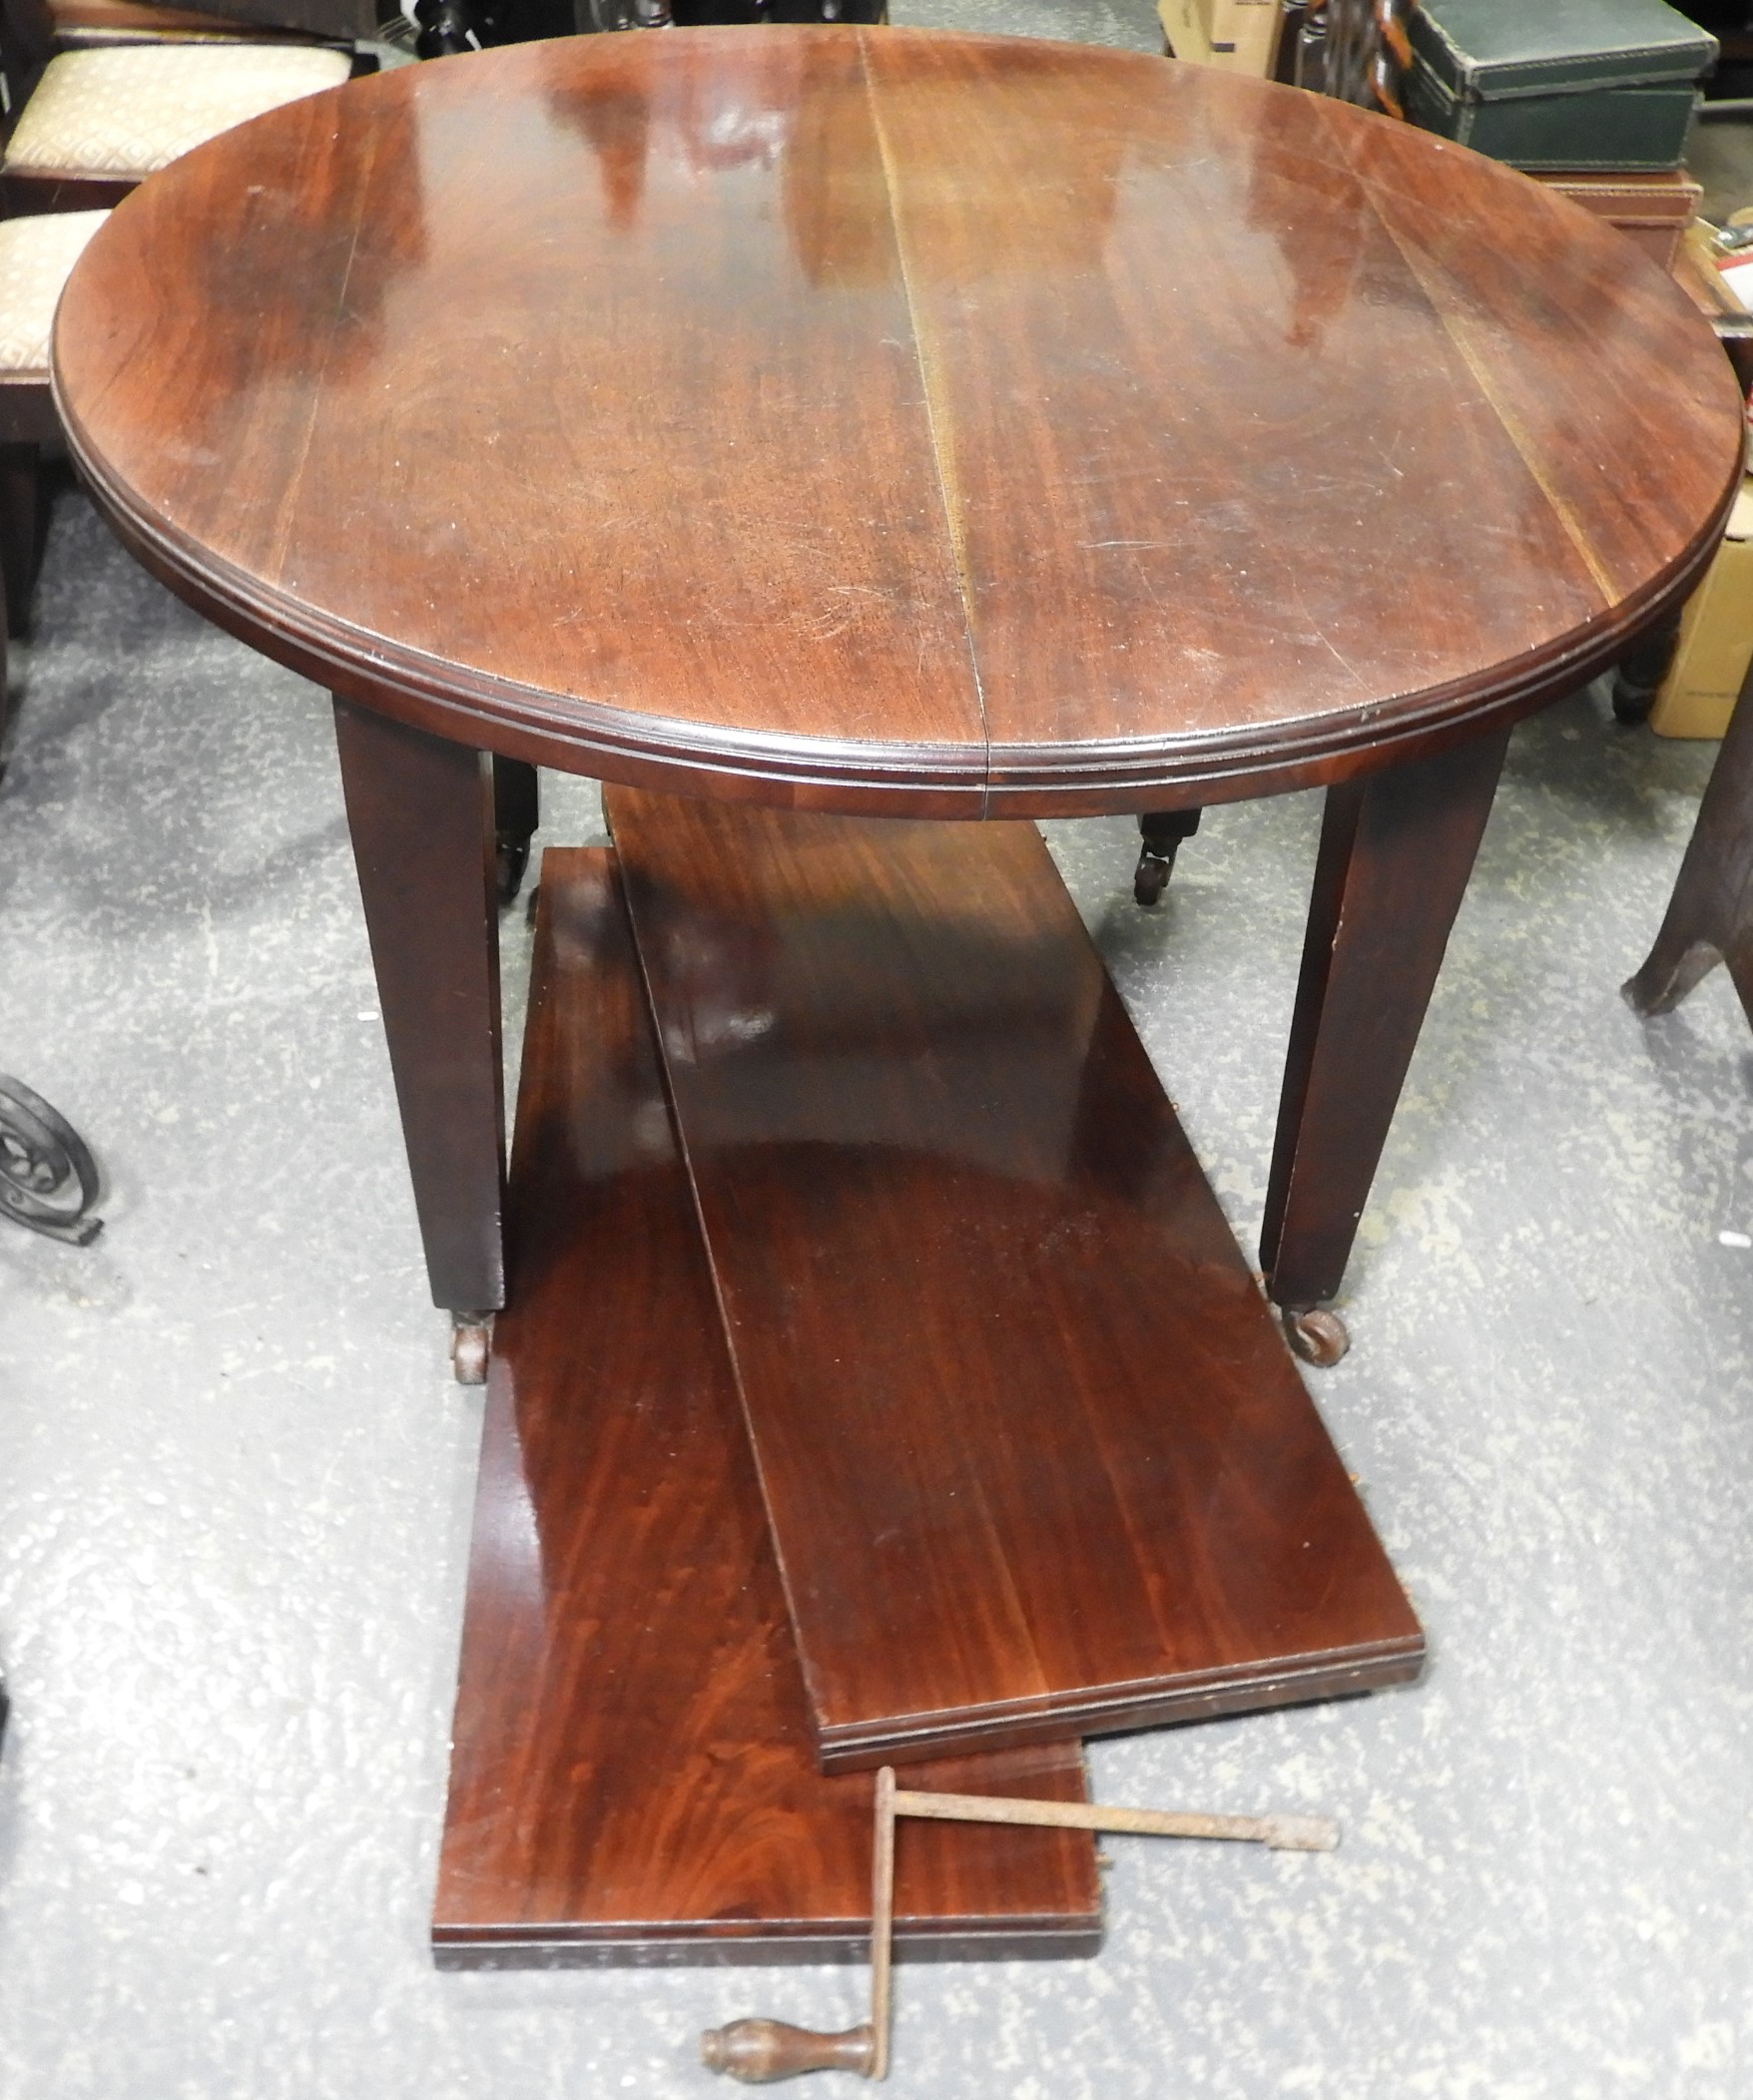 SHAPLAND & PETTER MAHOGANY CIRCULAR DINING TABLE WITH 2 EXTENSION LEAVES NO 6891 (77' EXTENDED)